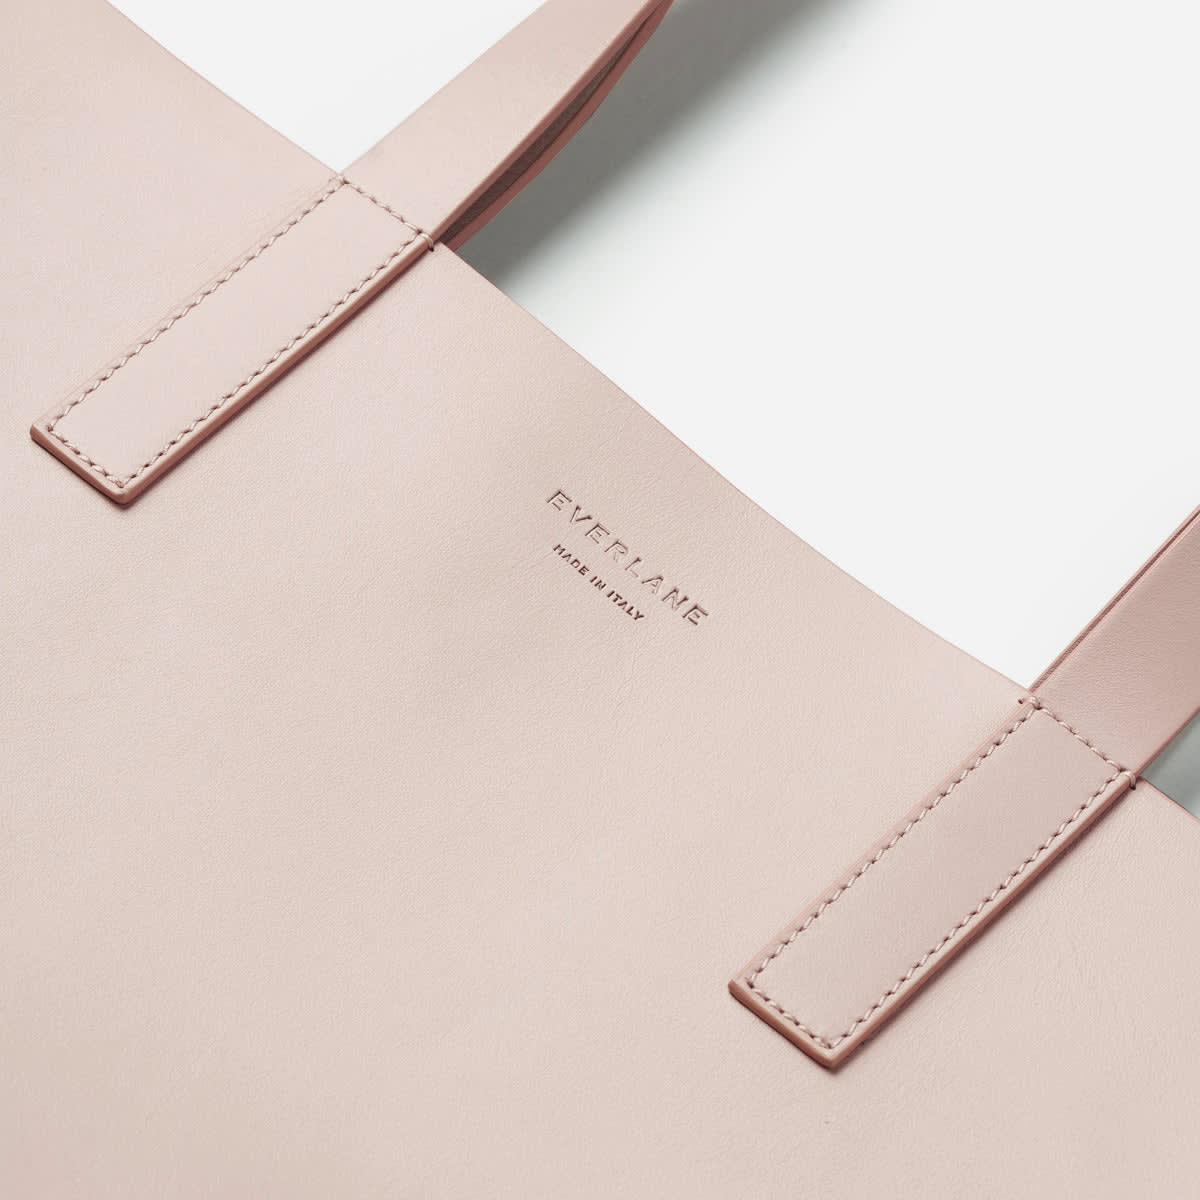 The New Day Market Tote Chocolate – Everlane